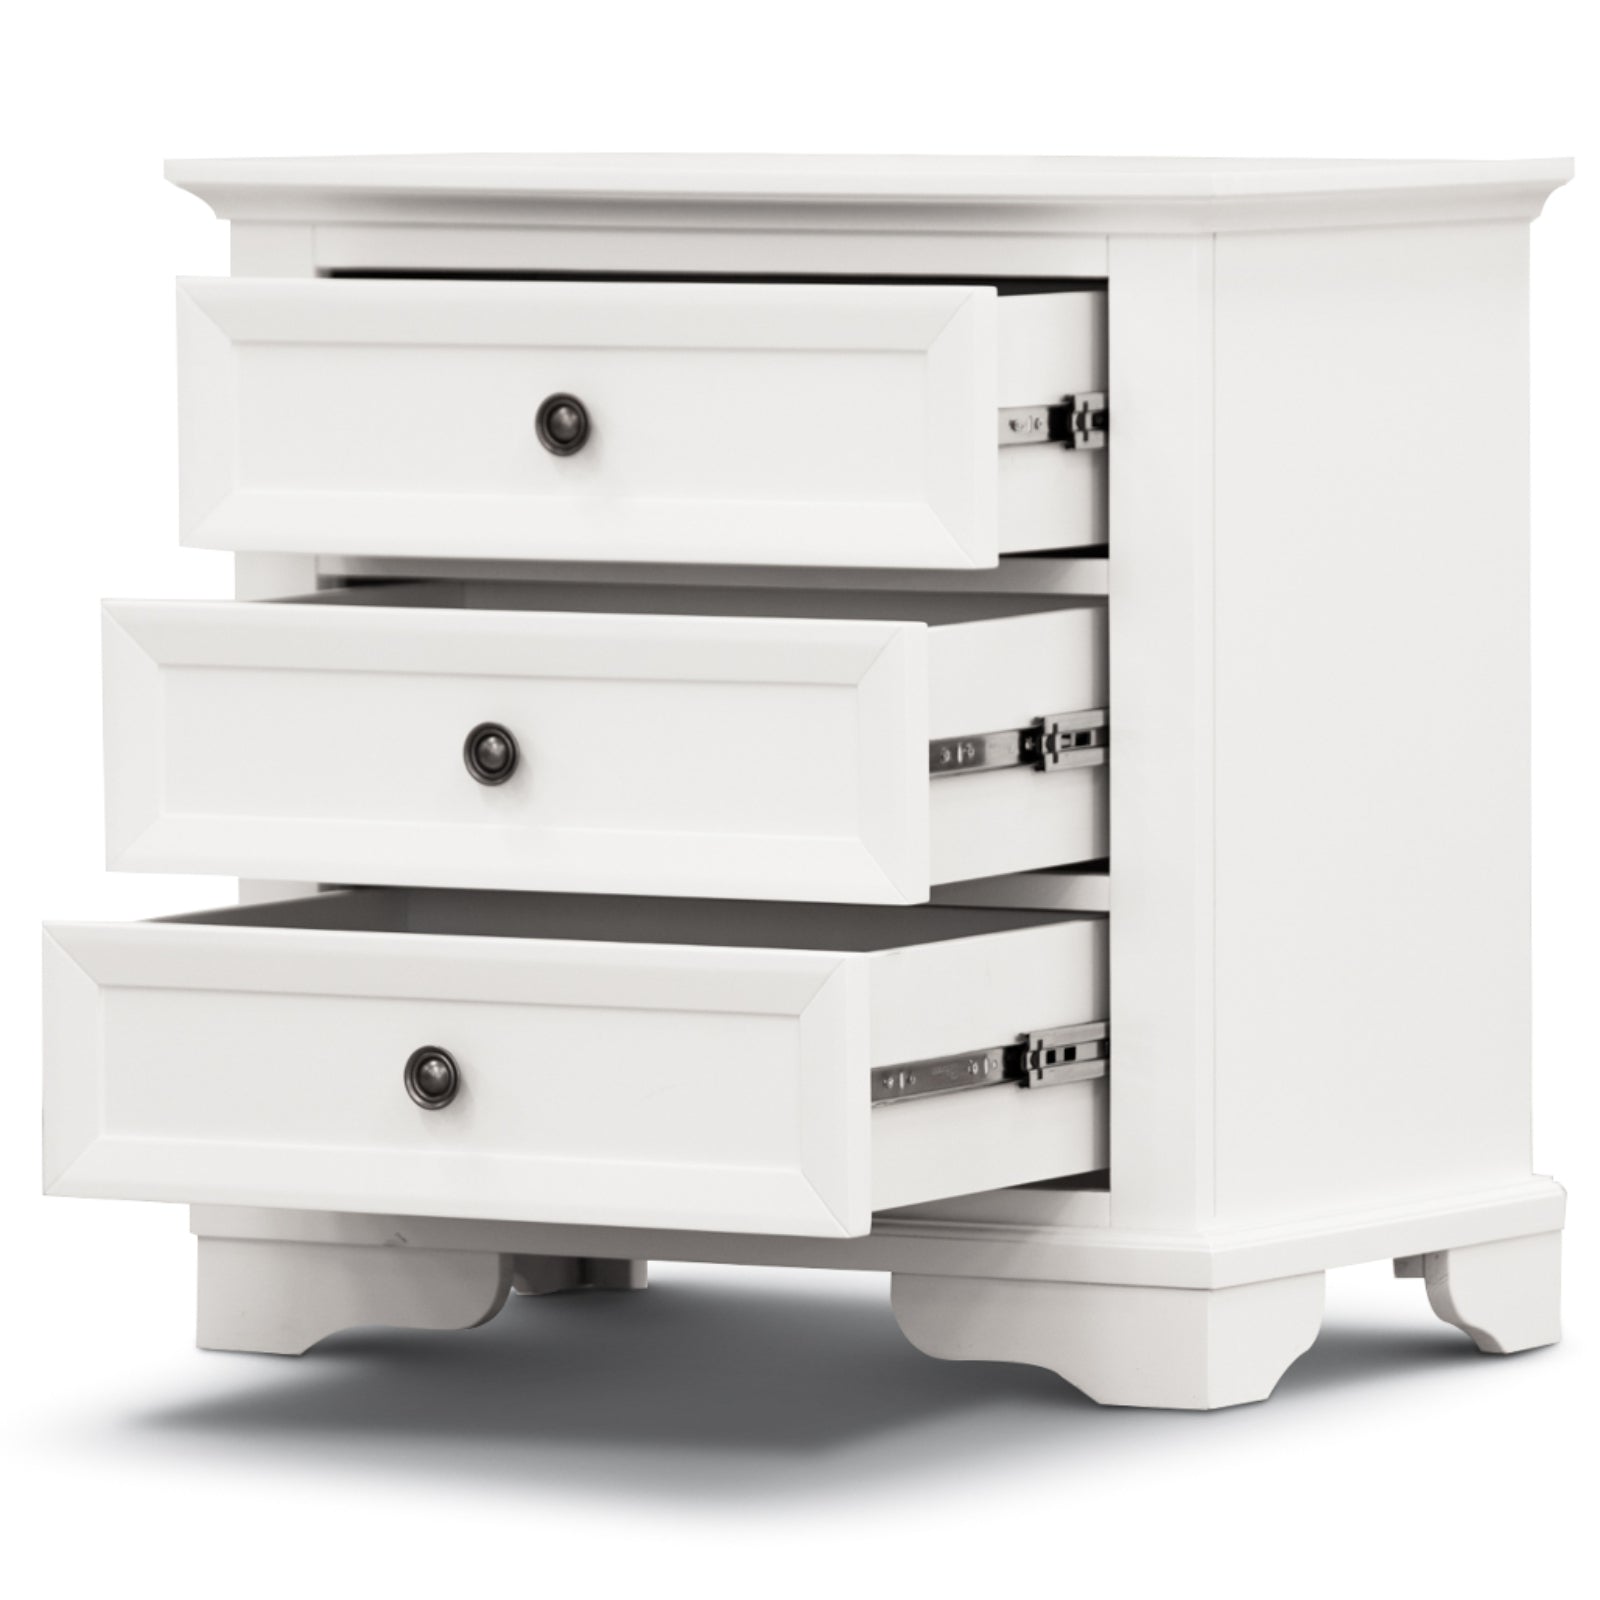 Celosia Bedside Table Set of 2pcs - 3 Drawers Storage Cabinet Nightstand - White - SILBERSHELL